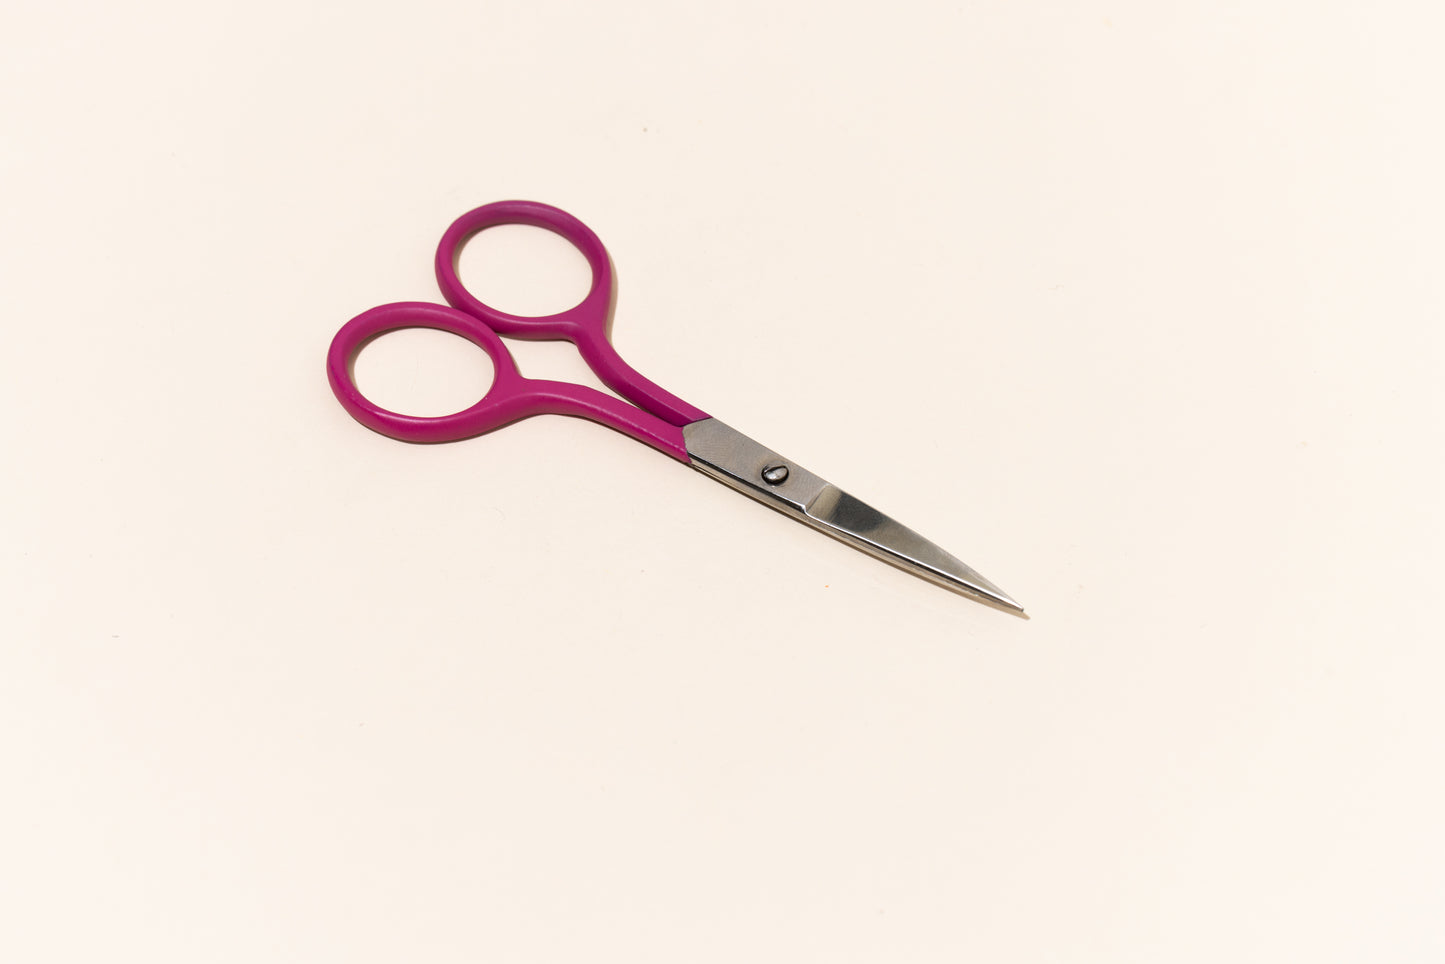 The Edit Embroidery scissors